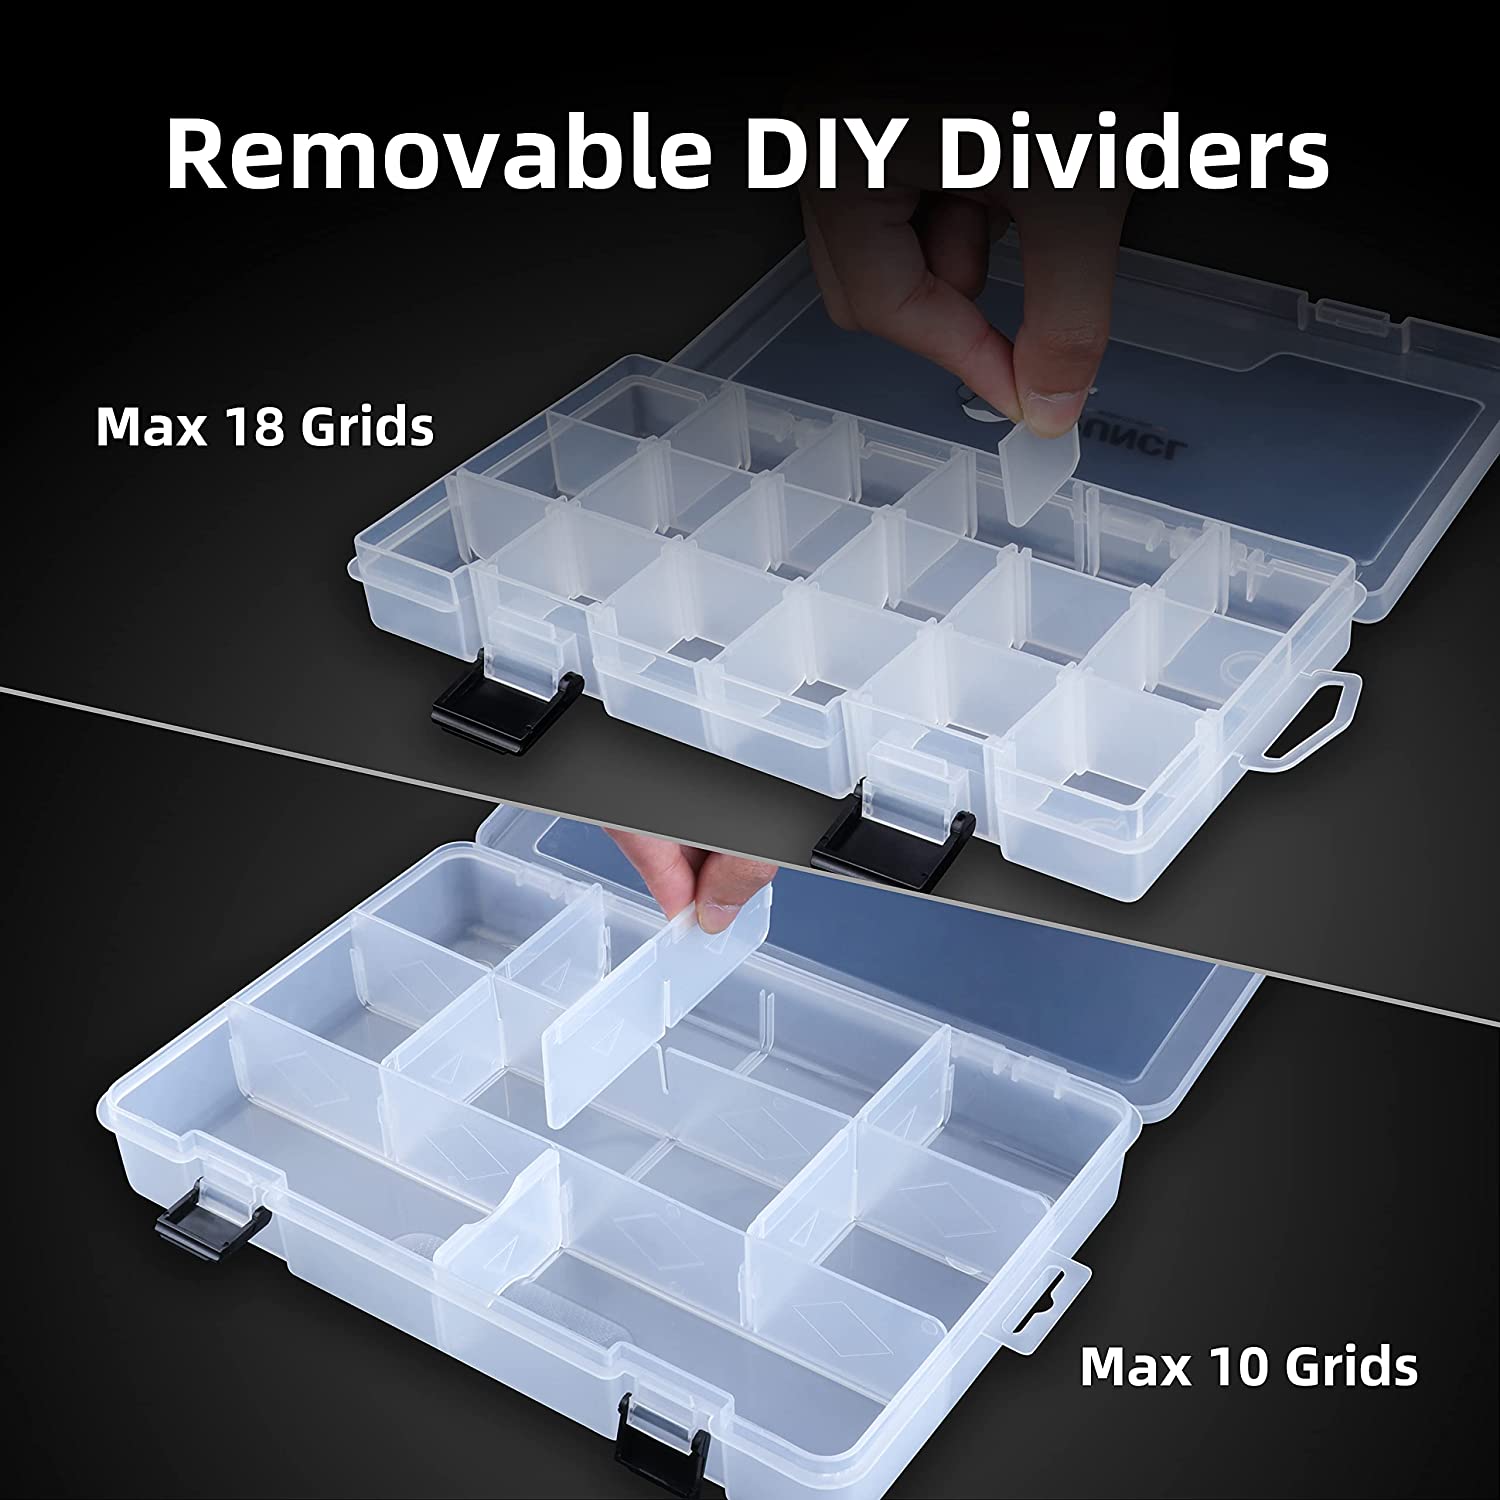 Beoccudo Tackle Box Bead Organizer 2 Pack Fishing Tackle Box Organizer  Plastic Compartment Storage Box Container with Dividers (Clear Tacklebox)